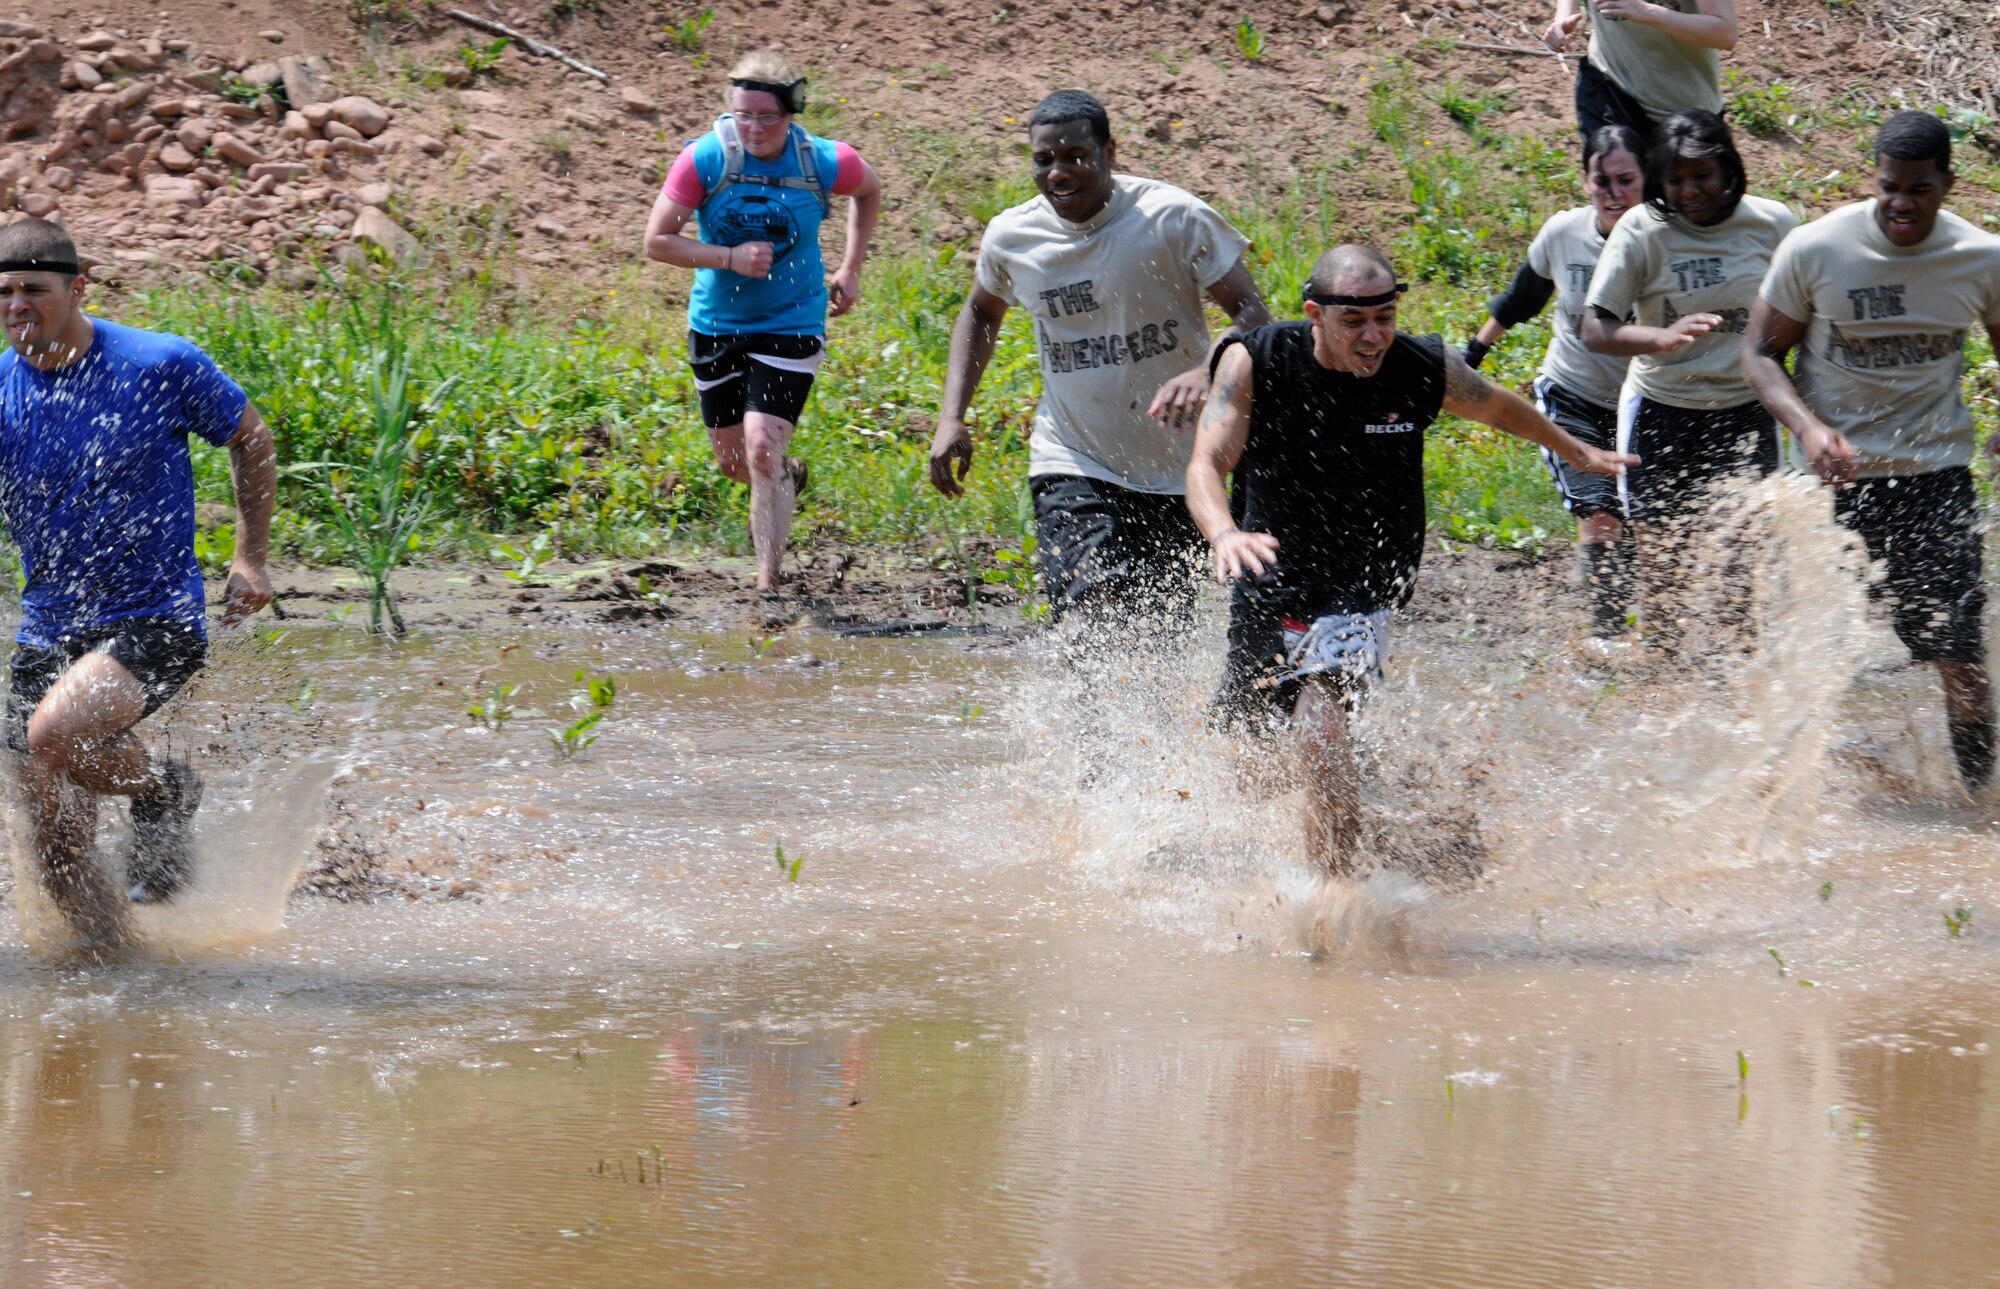 SPANGDAHLEM AIR BASE, Germany -- Competitors run through a pond during the Saber Endurance Challenge here June 3. Teams of five were judged on team creativity, guessing their time and money raised. Students from Bitburg High School guessed their time closest within four minutes of estimated completion. Team Soup Kitchen from the 52nd Equipment Maintenance Squadron was awarded most creative, and Team MDSS from the 52nd Medical Group raised the most money. The challenge was hosted by the Tier II council and raised money for the Wounded Warrior Project at Landstuhl Regional Medical Center, Germany. (U.S. Air Force photo/Airman 1st Class Brittney Frees)